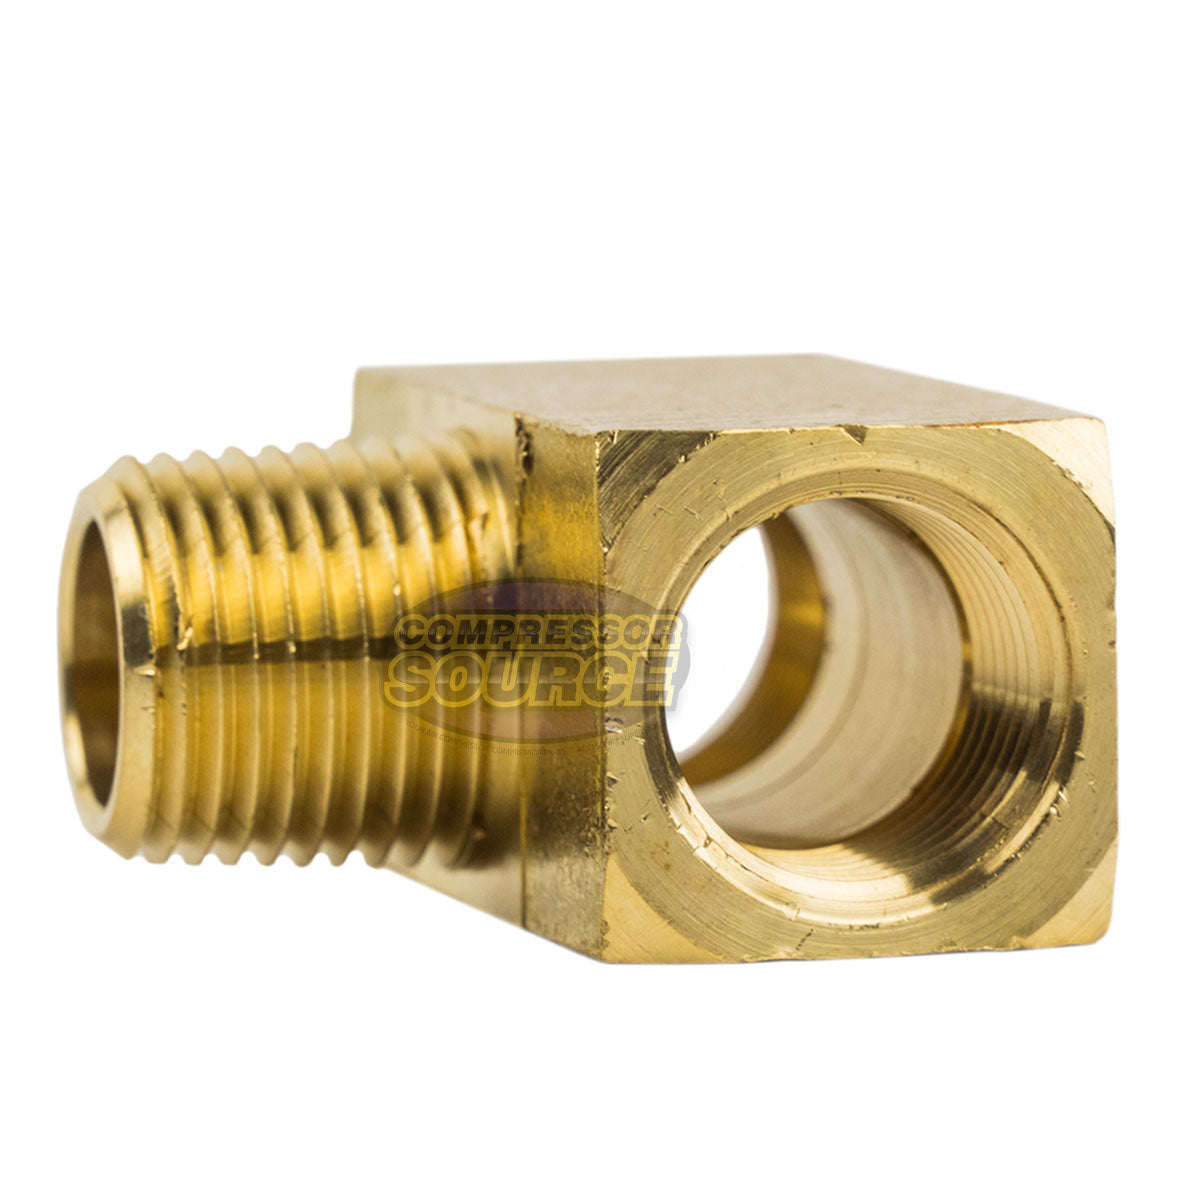 Male Branch Tee 1/2" Male NPT x 1/2" Female NPT Brass Union Tee Pipe Connector